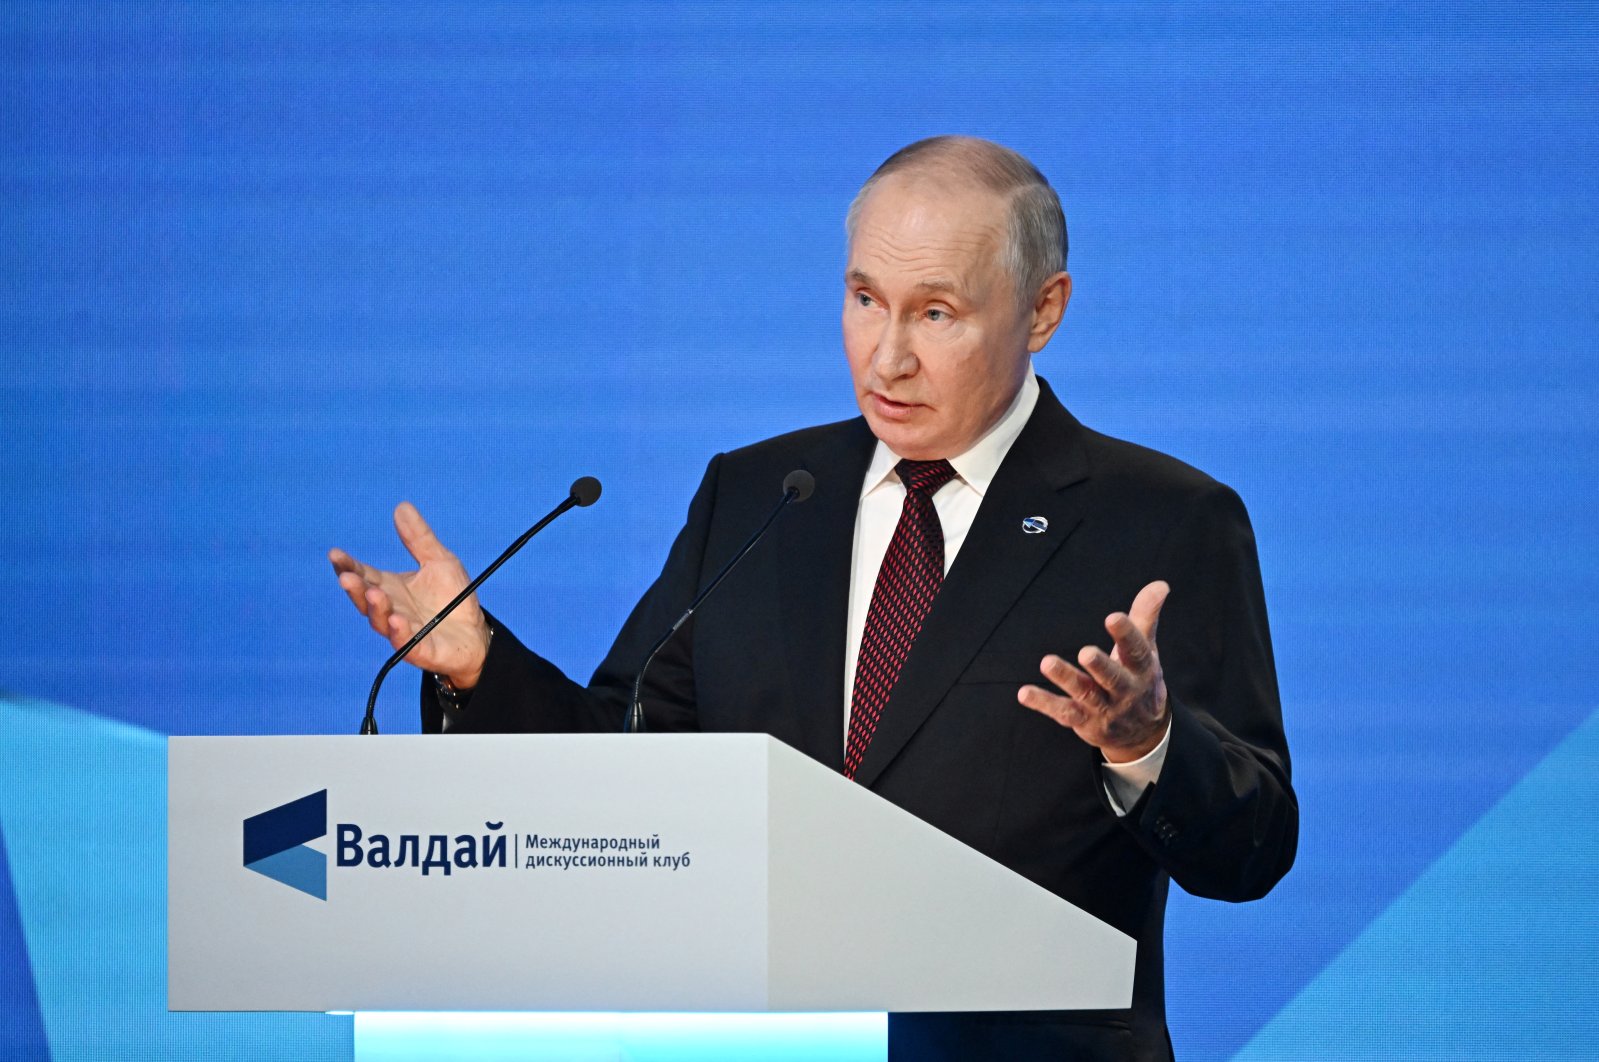 Russian President Vladimir Putin delivers a speech at the 20th Annual Meeting of the Valdai Discussion Club in Sochi, Russia, Oct. 5, 2023. (Sputnik via Reuters)